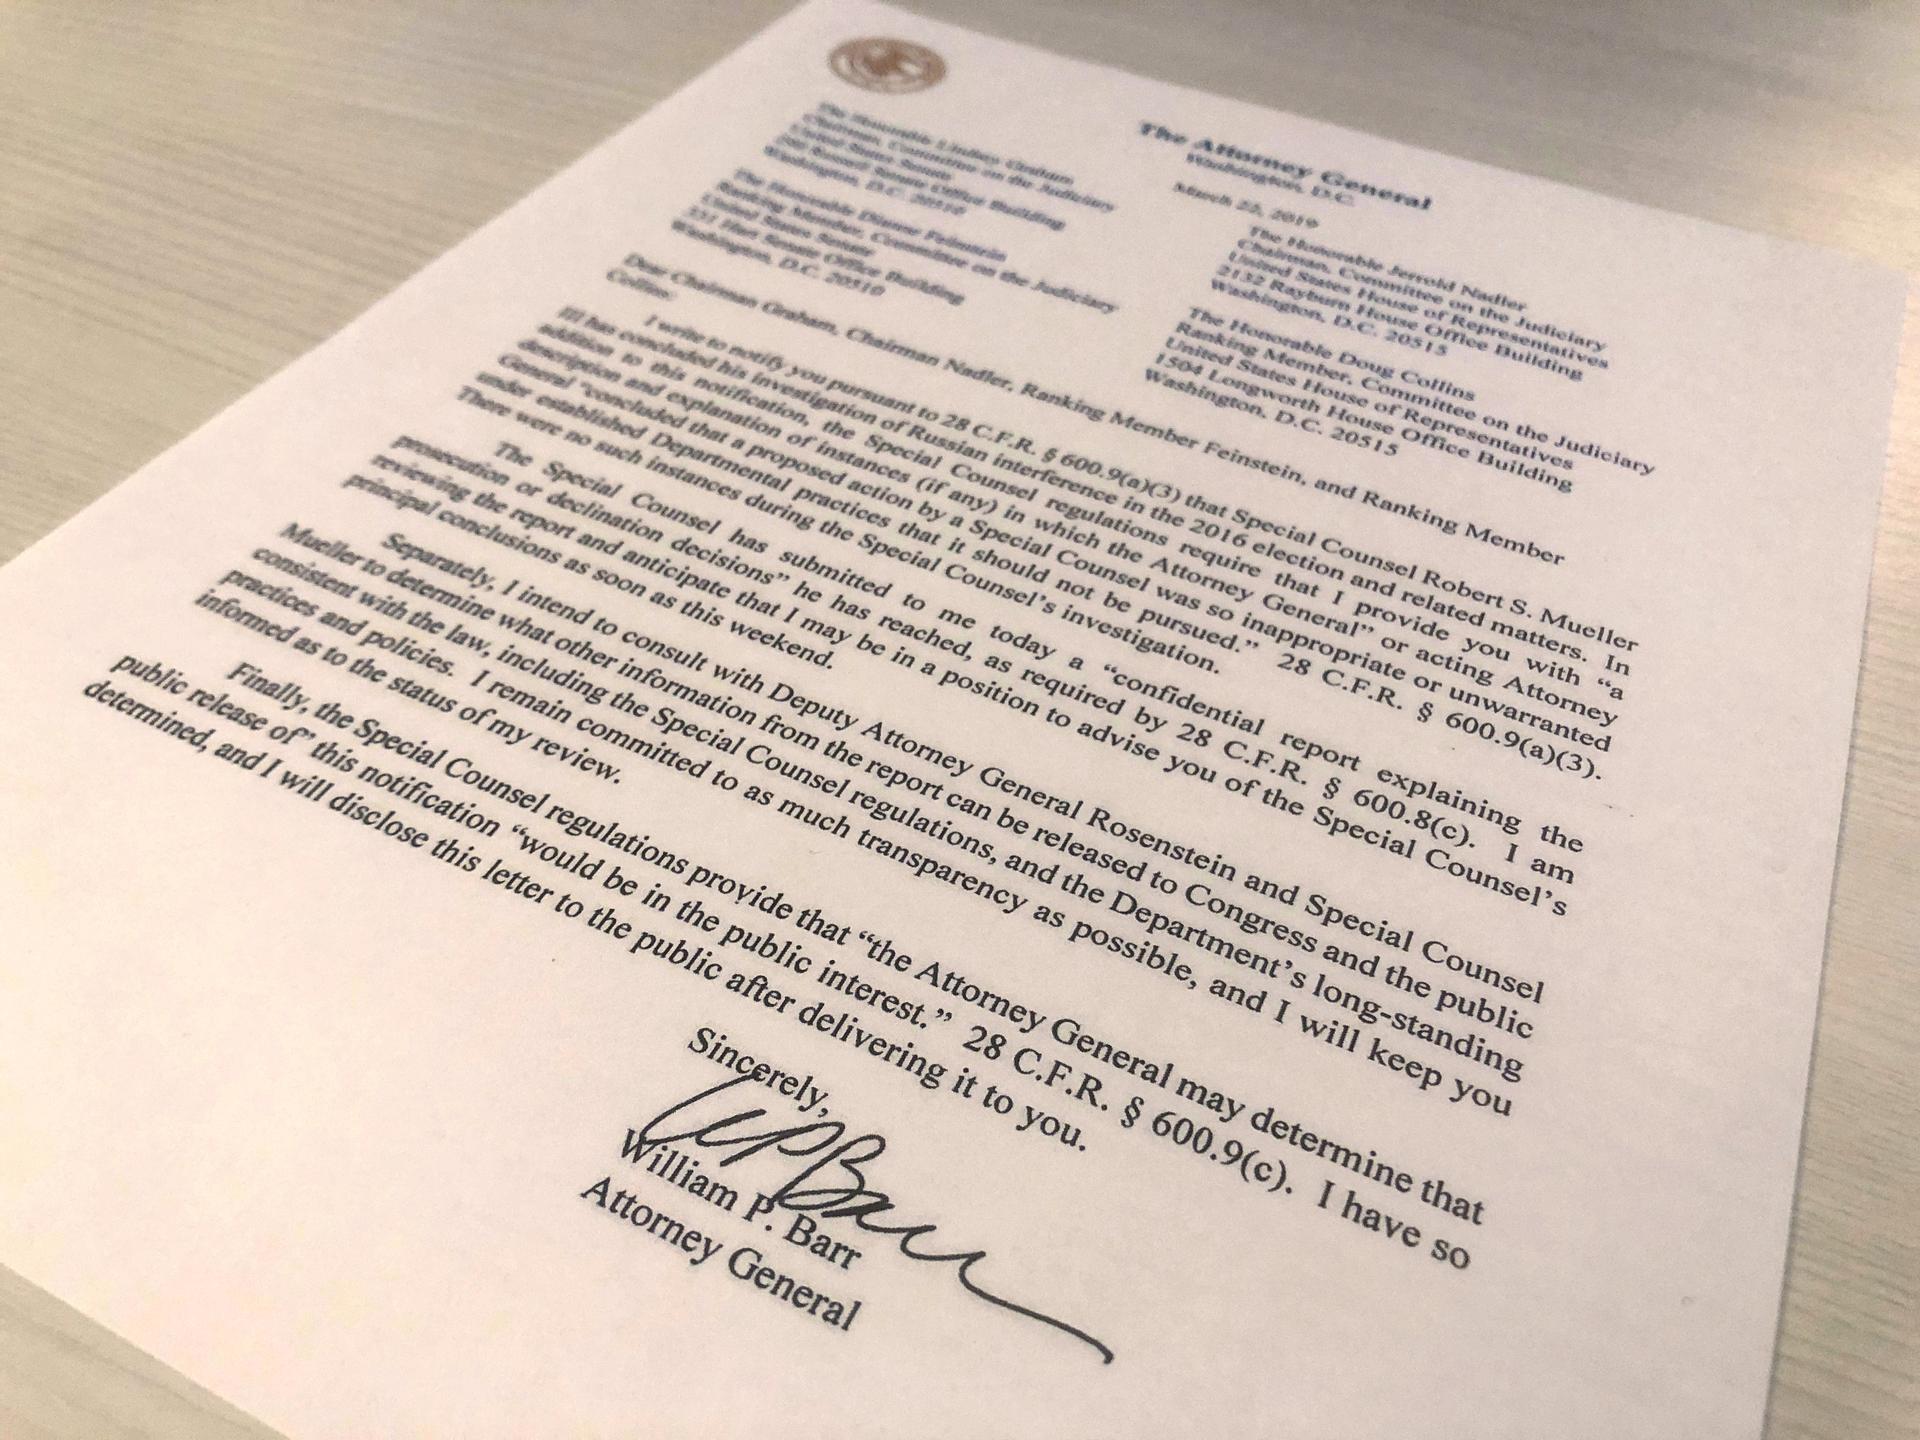 A photo of the document written by Attorney General Barr about the submission of the Special Counsel's report.